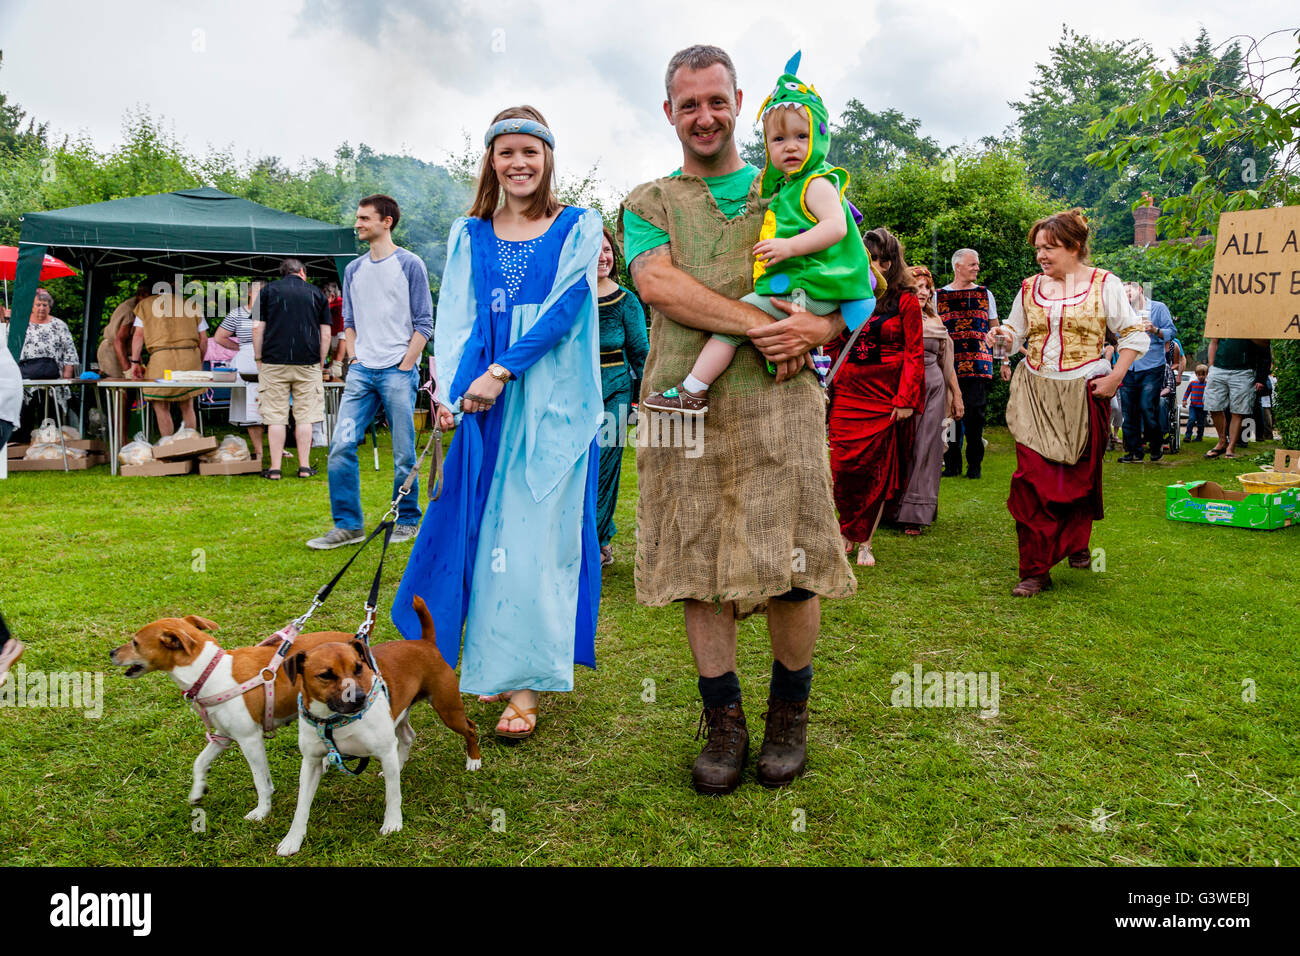 A Local Family Dressed In Medieval Costume At The Medieval Fair Of Abinger, Surrey, UK Stock Photo